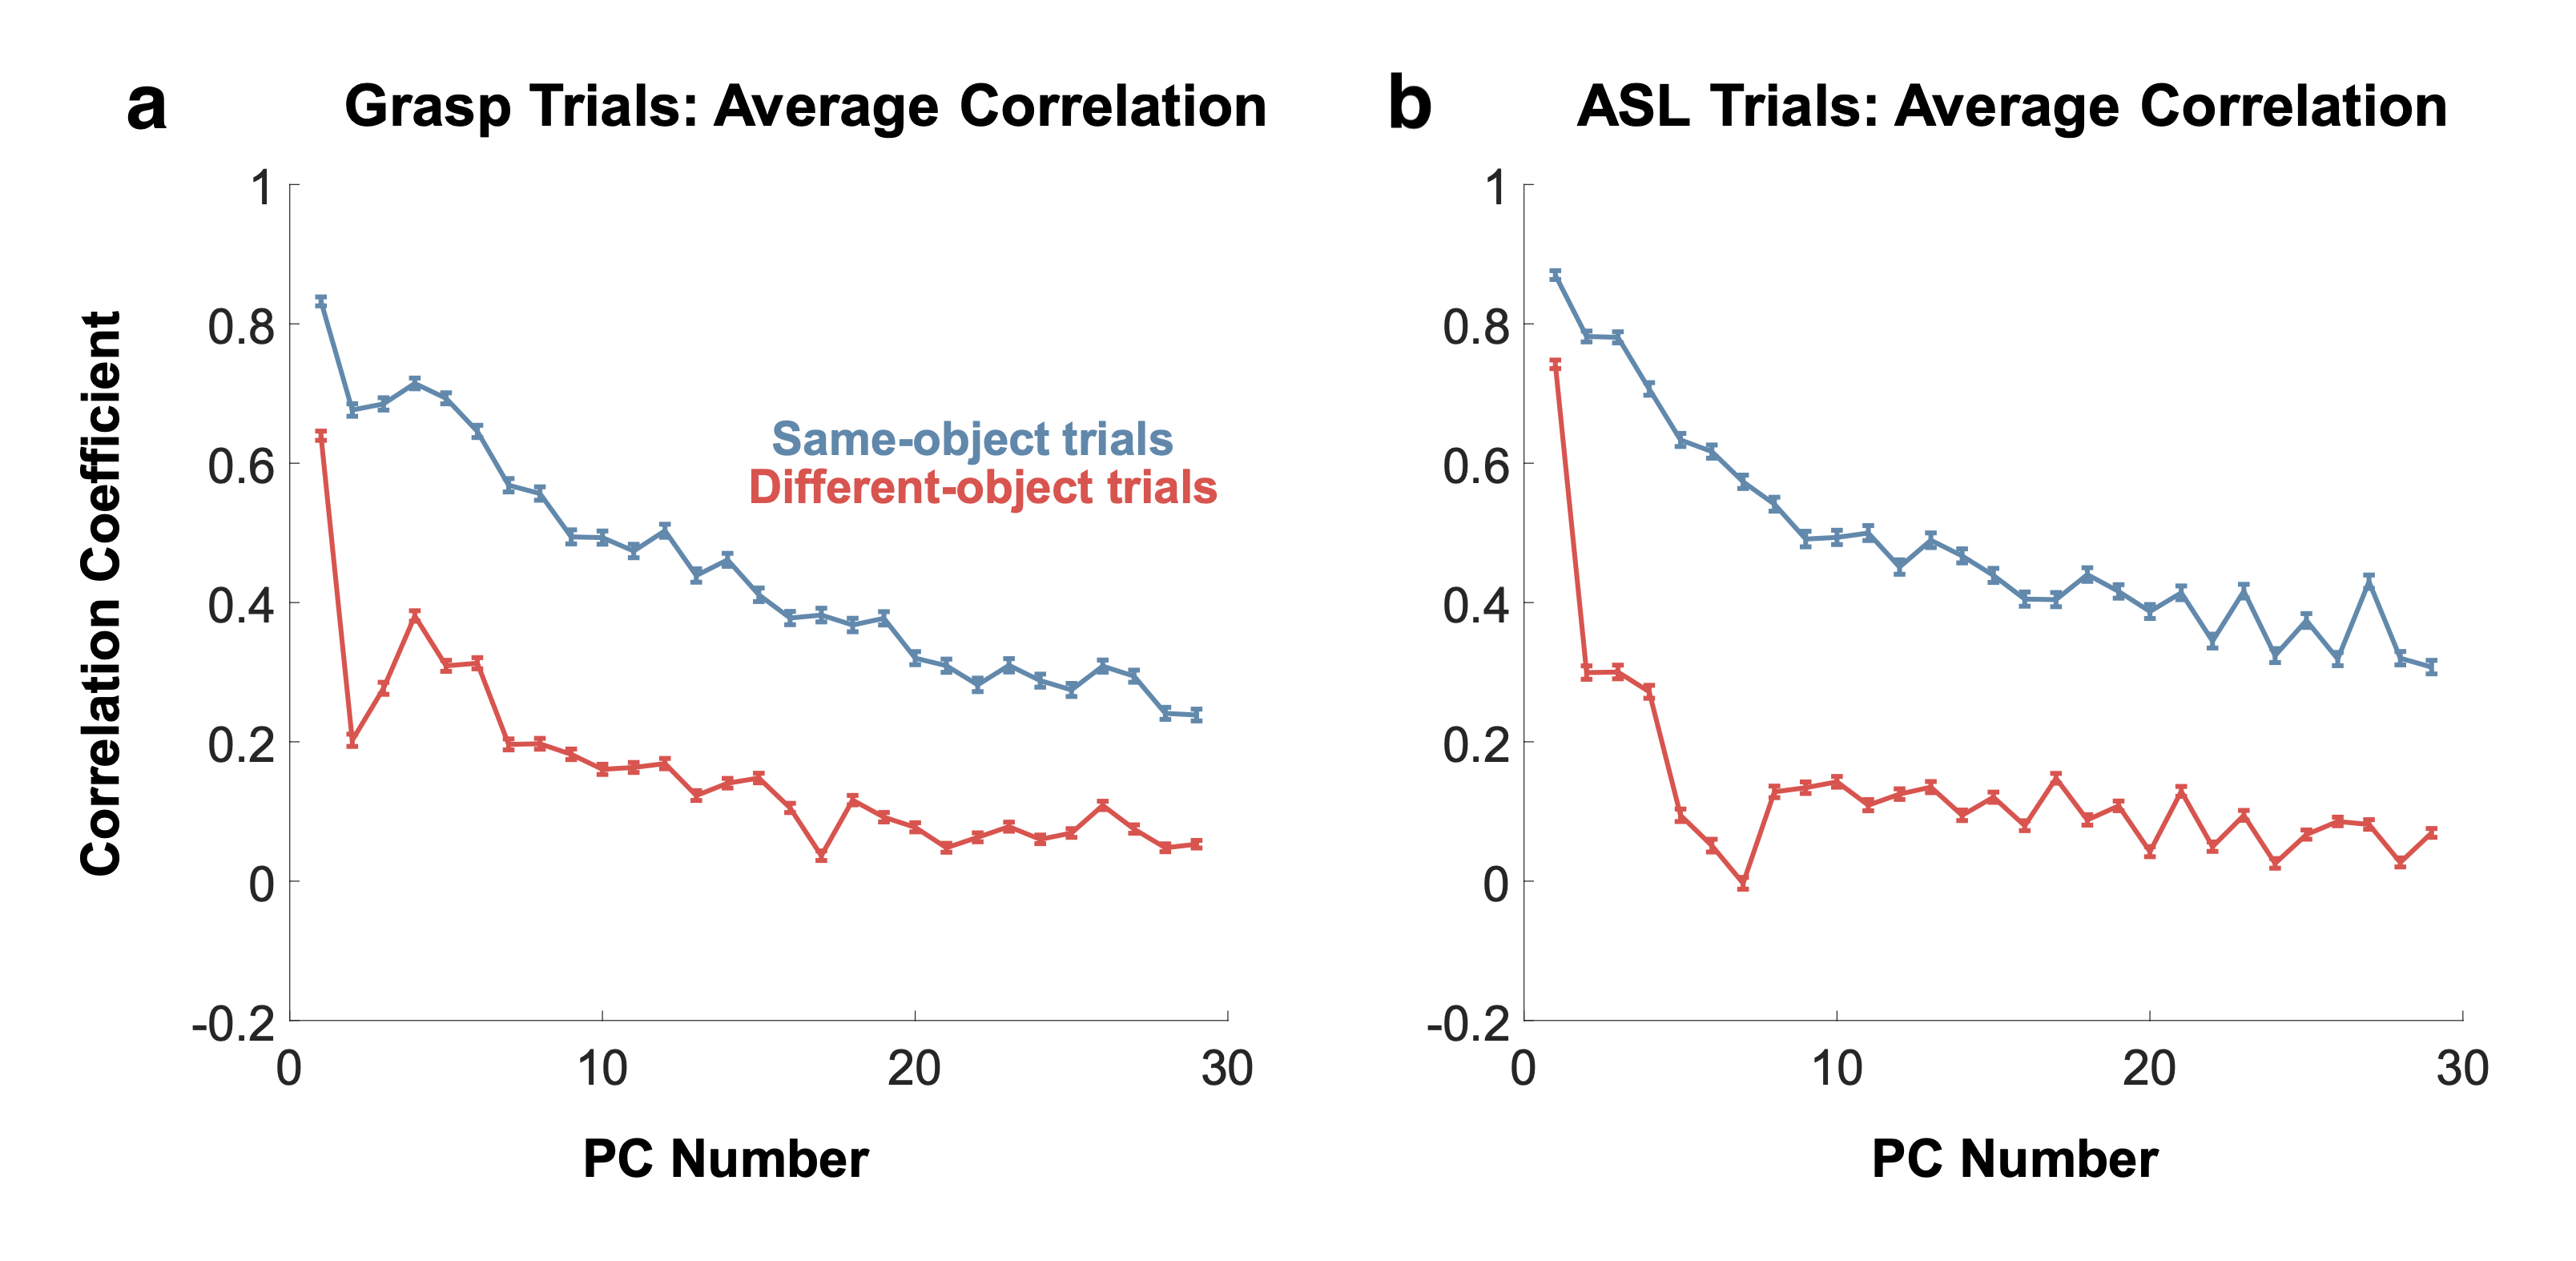 Figure 1: Taken from Yan et al. 2020. Plots show mean correlations between hand joint kinematic trajectories during grasp trials with the same (blue) and different (red) objects (a) and ASL signs (b) projected onto the same principle components. Correlations are averaged across 8 subjects. Within-object and within-sign correlations are systematically higher than their shuffled counterparts. Error bars denote SEM. This data supports the idea that low-variance components of kinematics data contain task-specific structure rather than merely reflecting noise. This is encouraging for our experiments, which hope to extend this idea into careful analyses of task specific features of EMG data across learning and in response to perturbations.